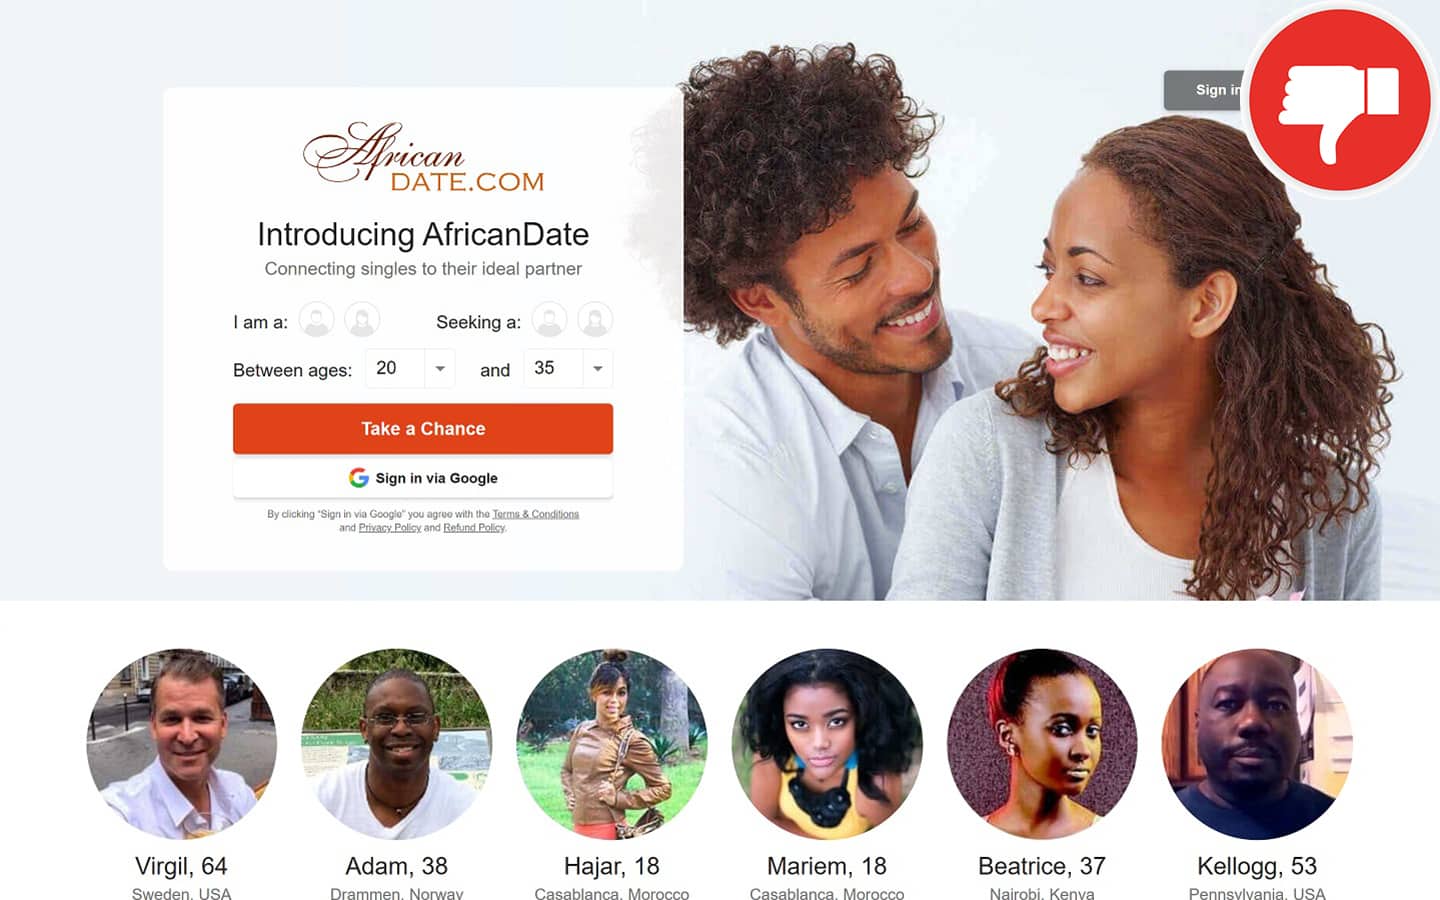 Review AfricanDate.com scam experience